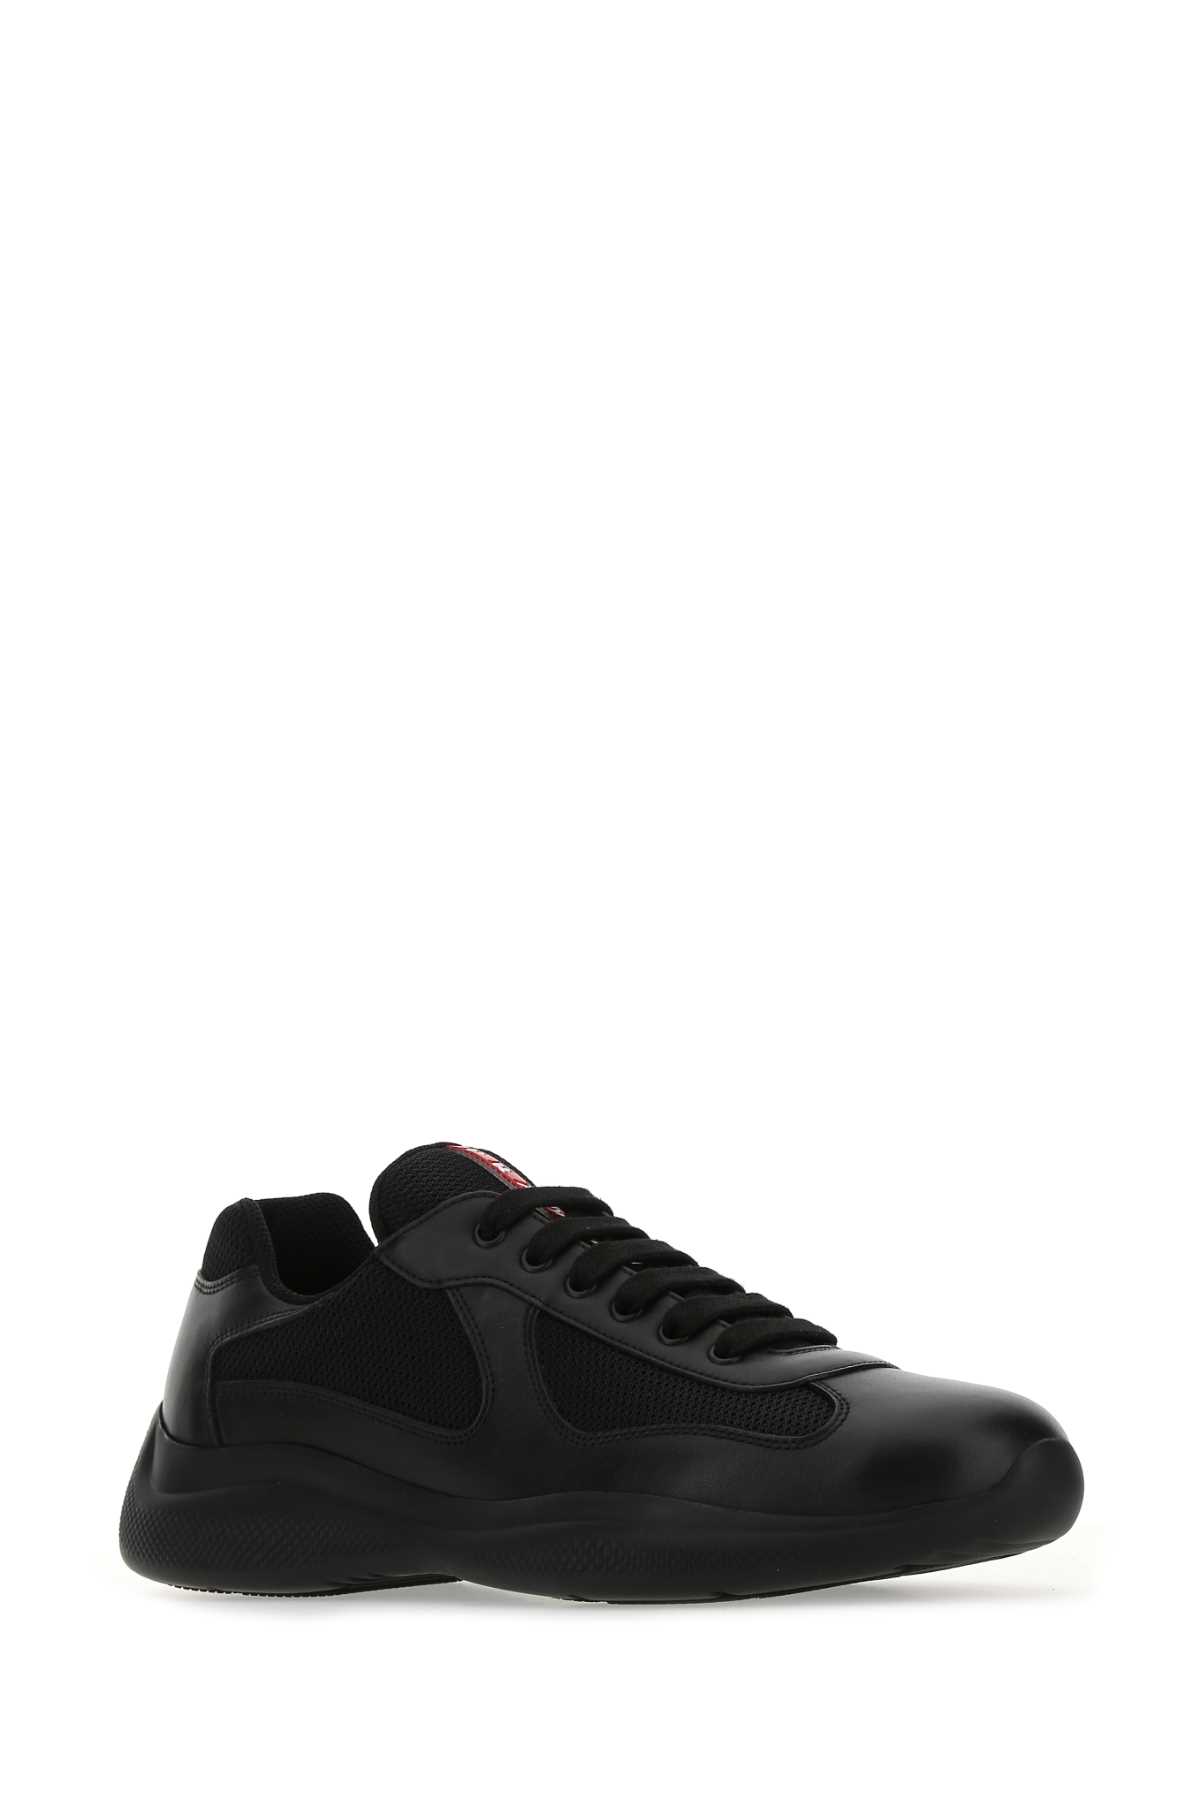 Shop Prada Black Leather And Mesh Sneakers In F0002